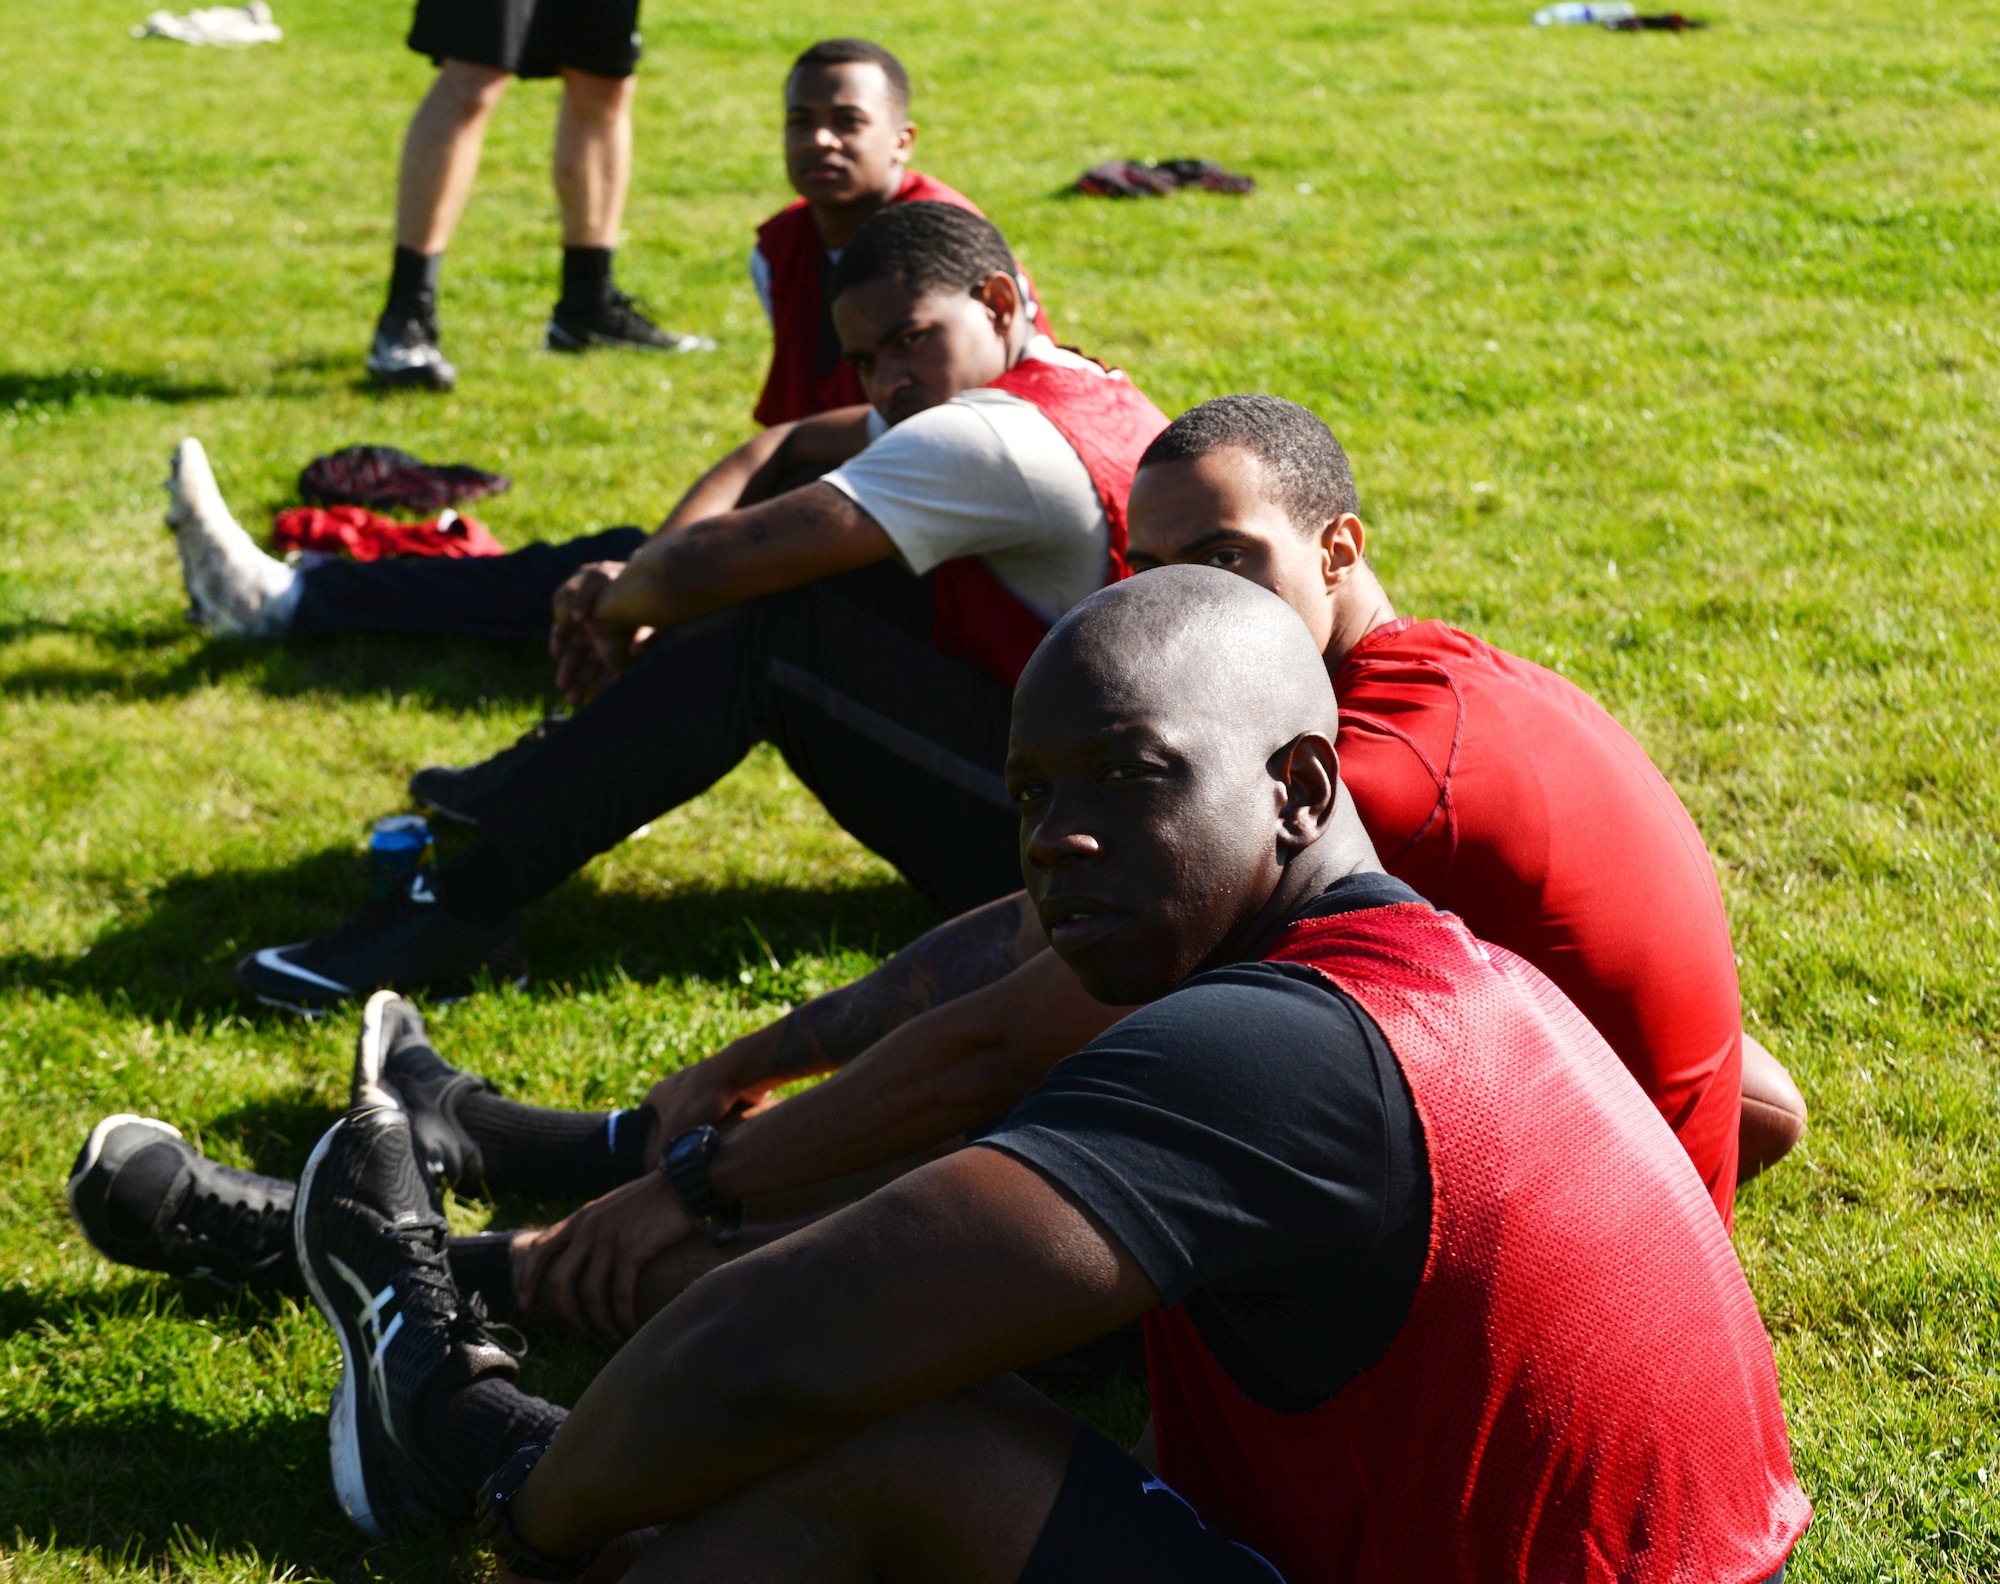 Airmen from the 48th Civil Engineer Squadron Fire Department take a break from a soccer game during the Battle of the Badges, Sept. 30, 2017, on RAF Mildenhall, England. The Battle of the Badges was initiated to build camaraderie between the first responders. The 100th Civil Engineer Squadron hosted this year’s competition. (U.S. Air Force photo by Airman 1st Class Alexandria Lee)